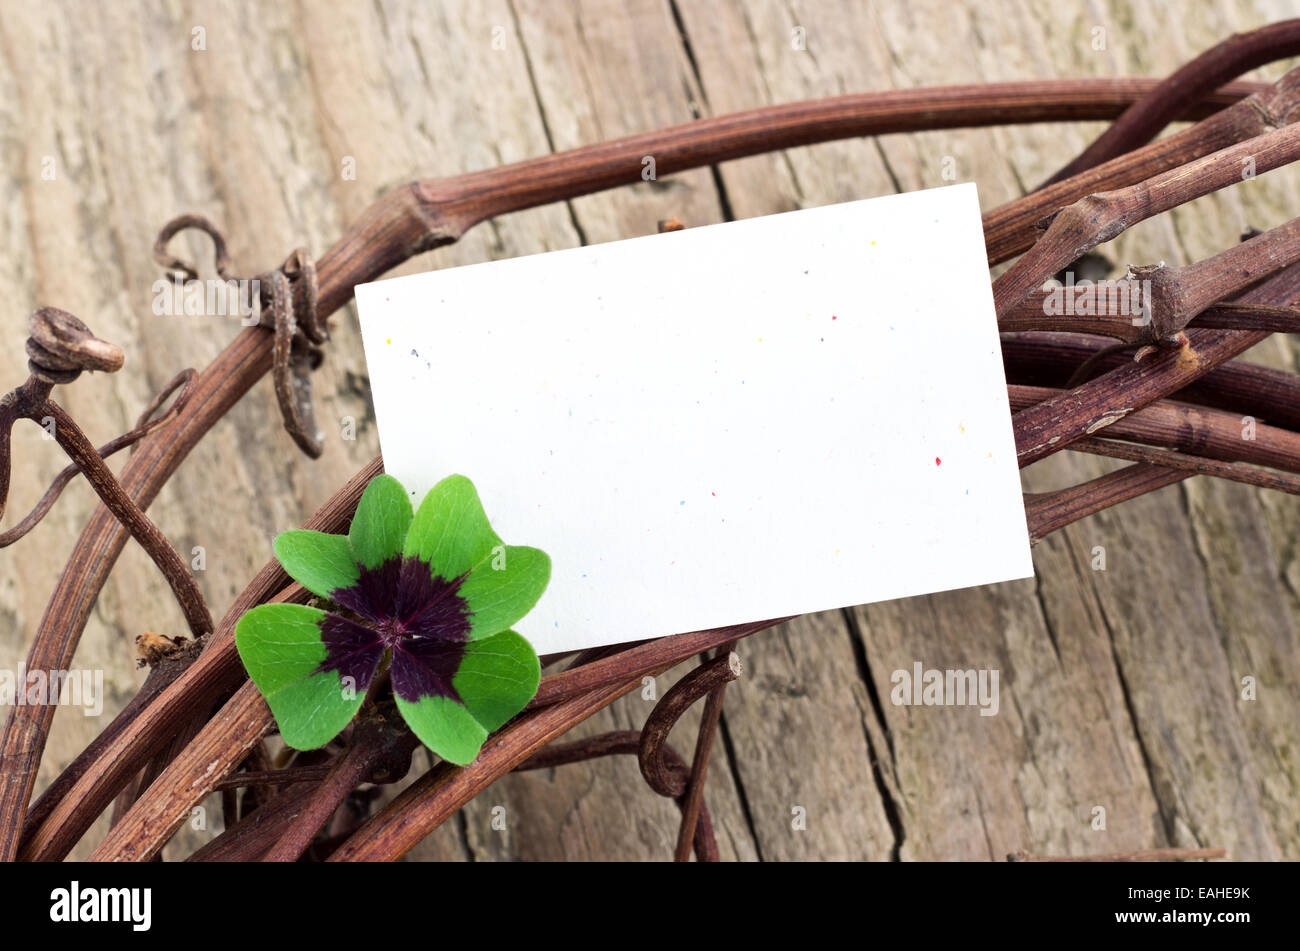 Leafed clover and card on wooden board Stock Photo